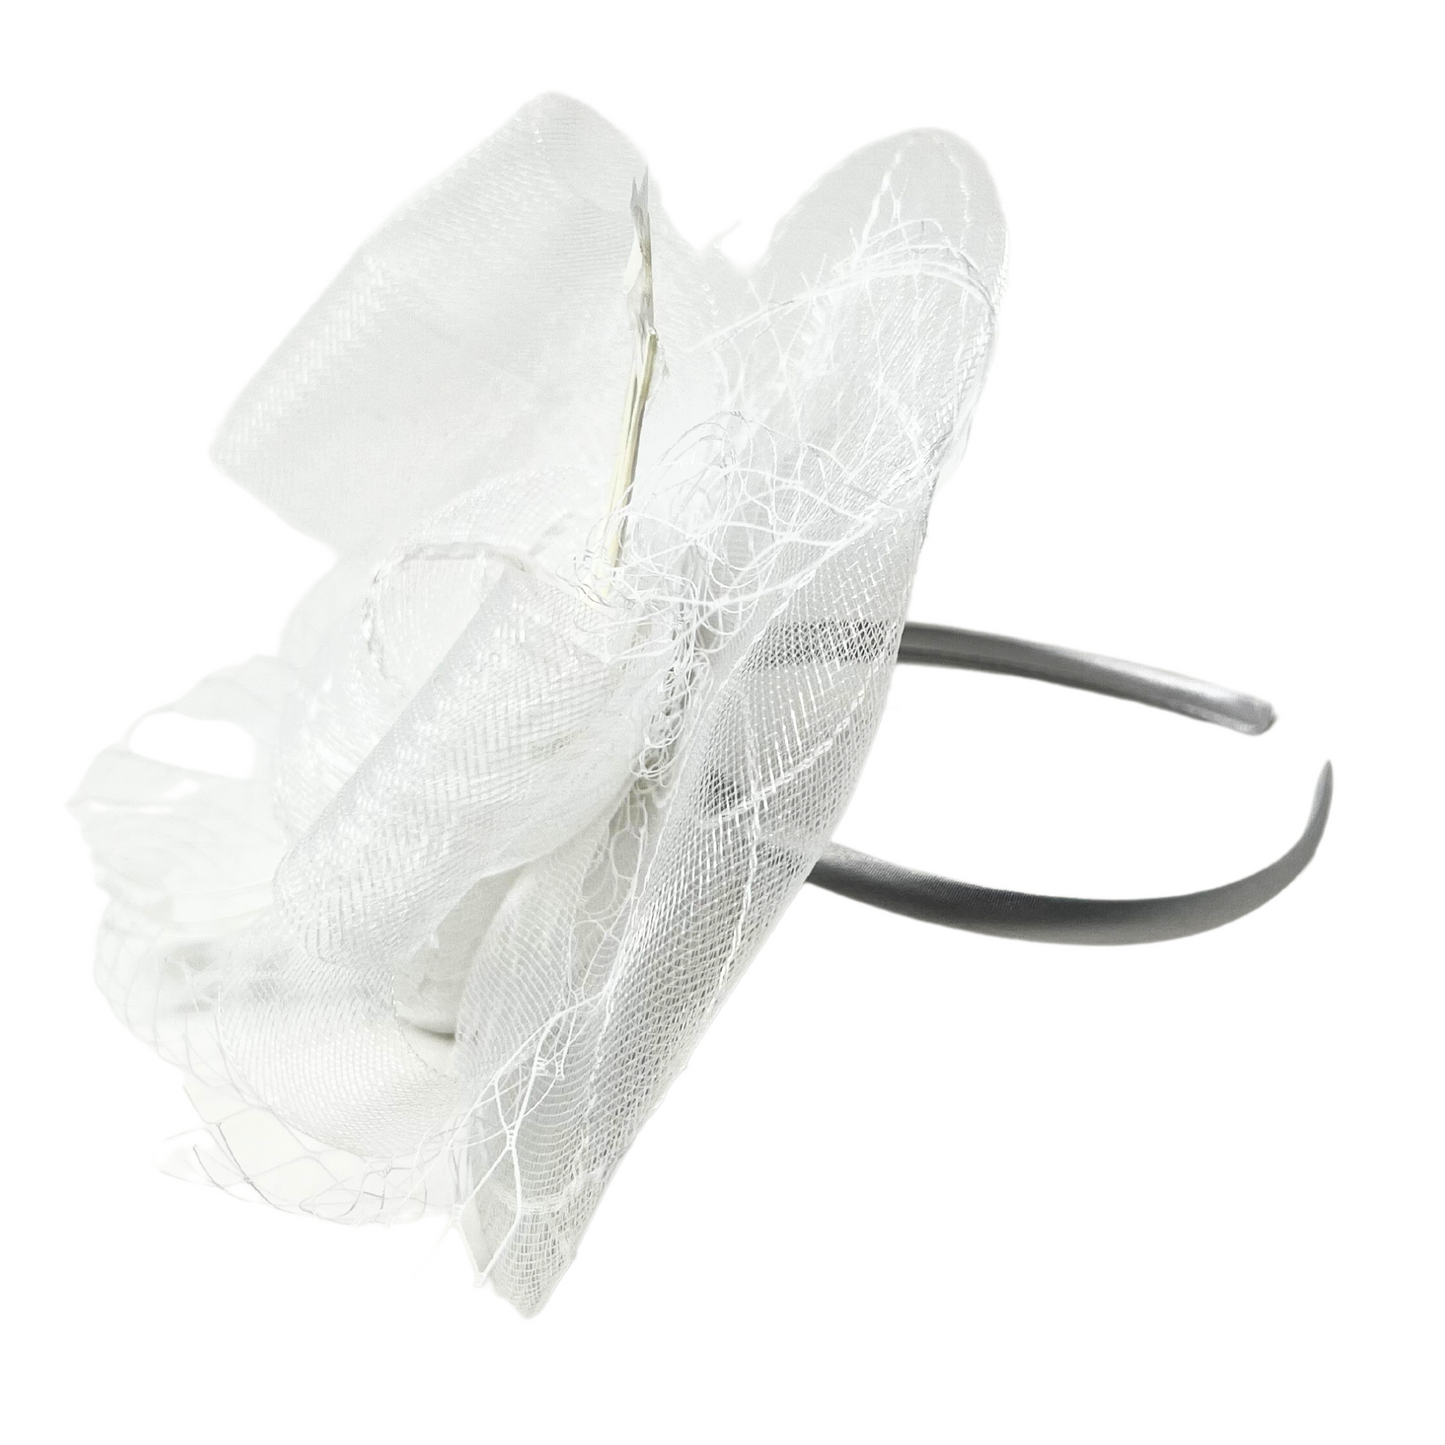 Fascinator Netted Disk With Hairband and Hair Clip